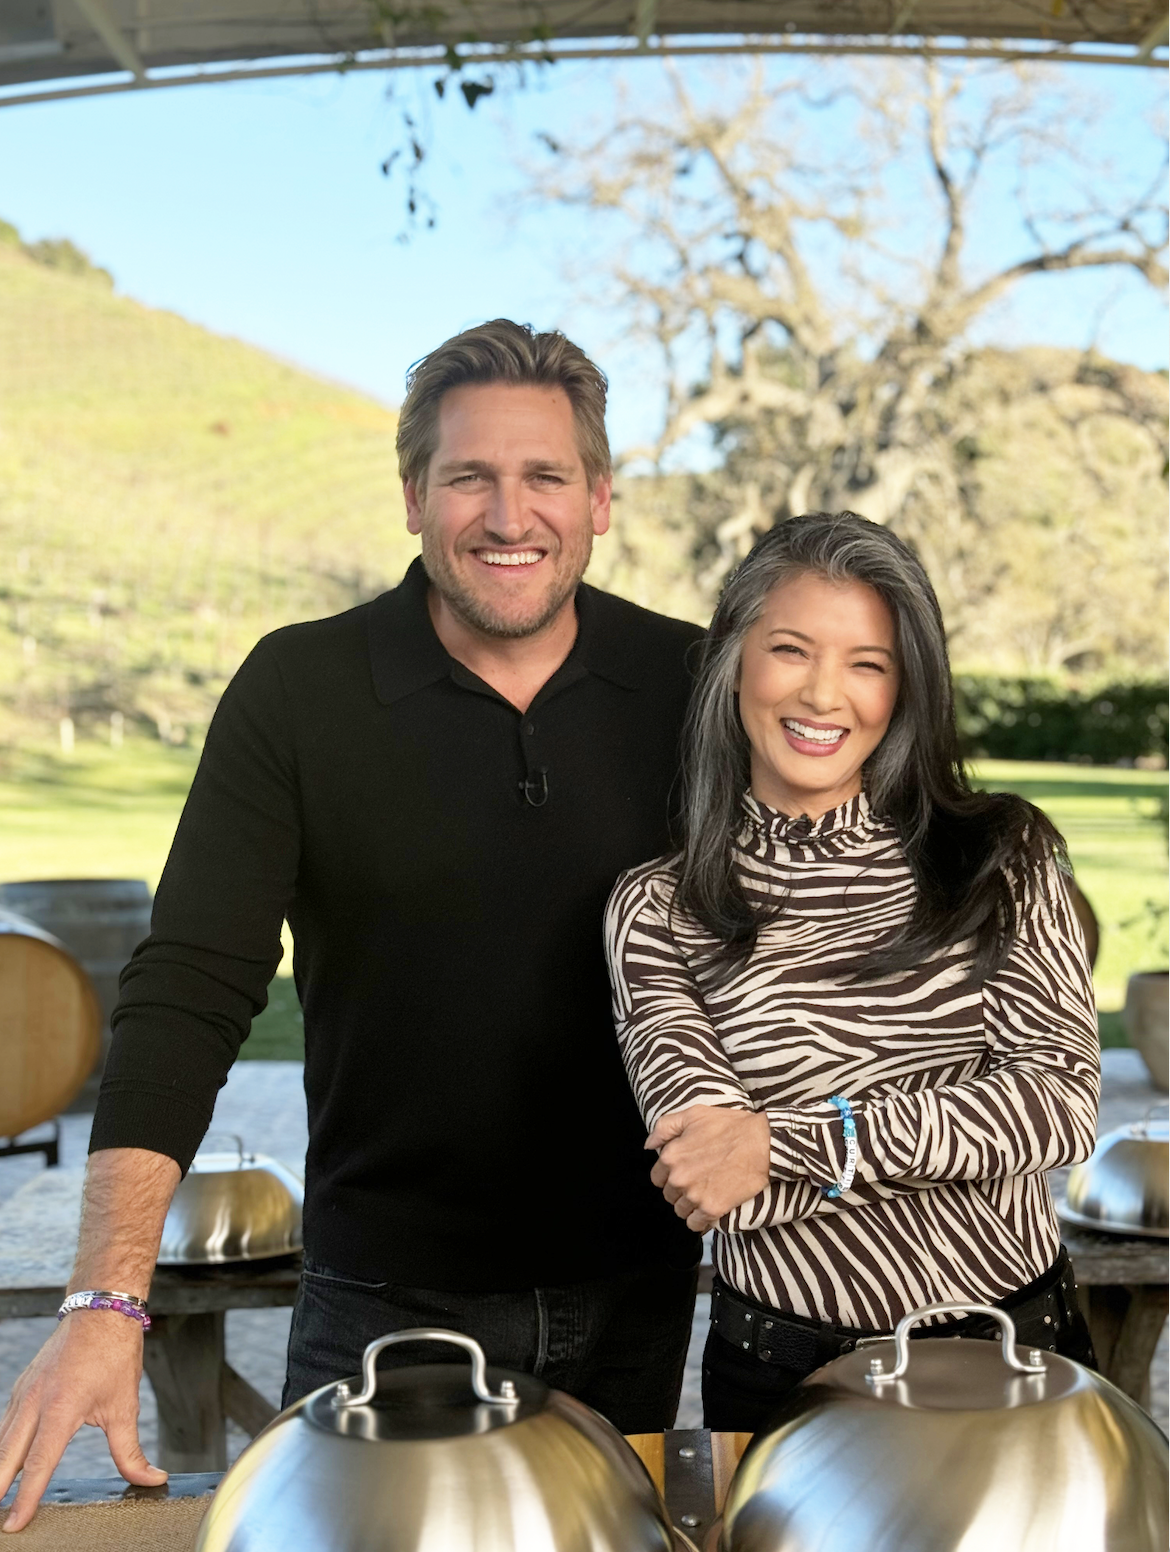 Getting Grilled with Curtis Stone